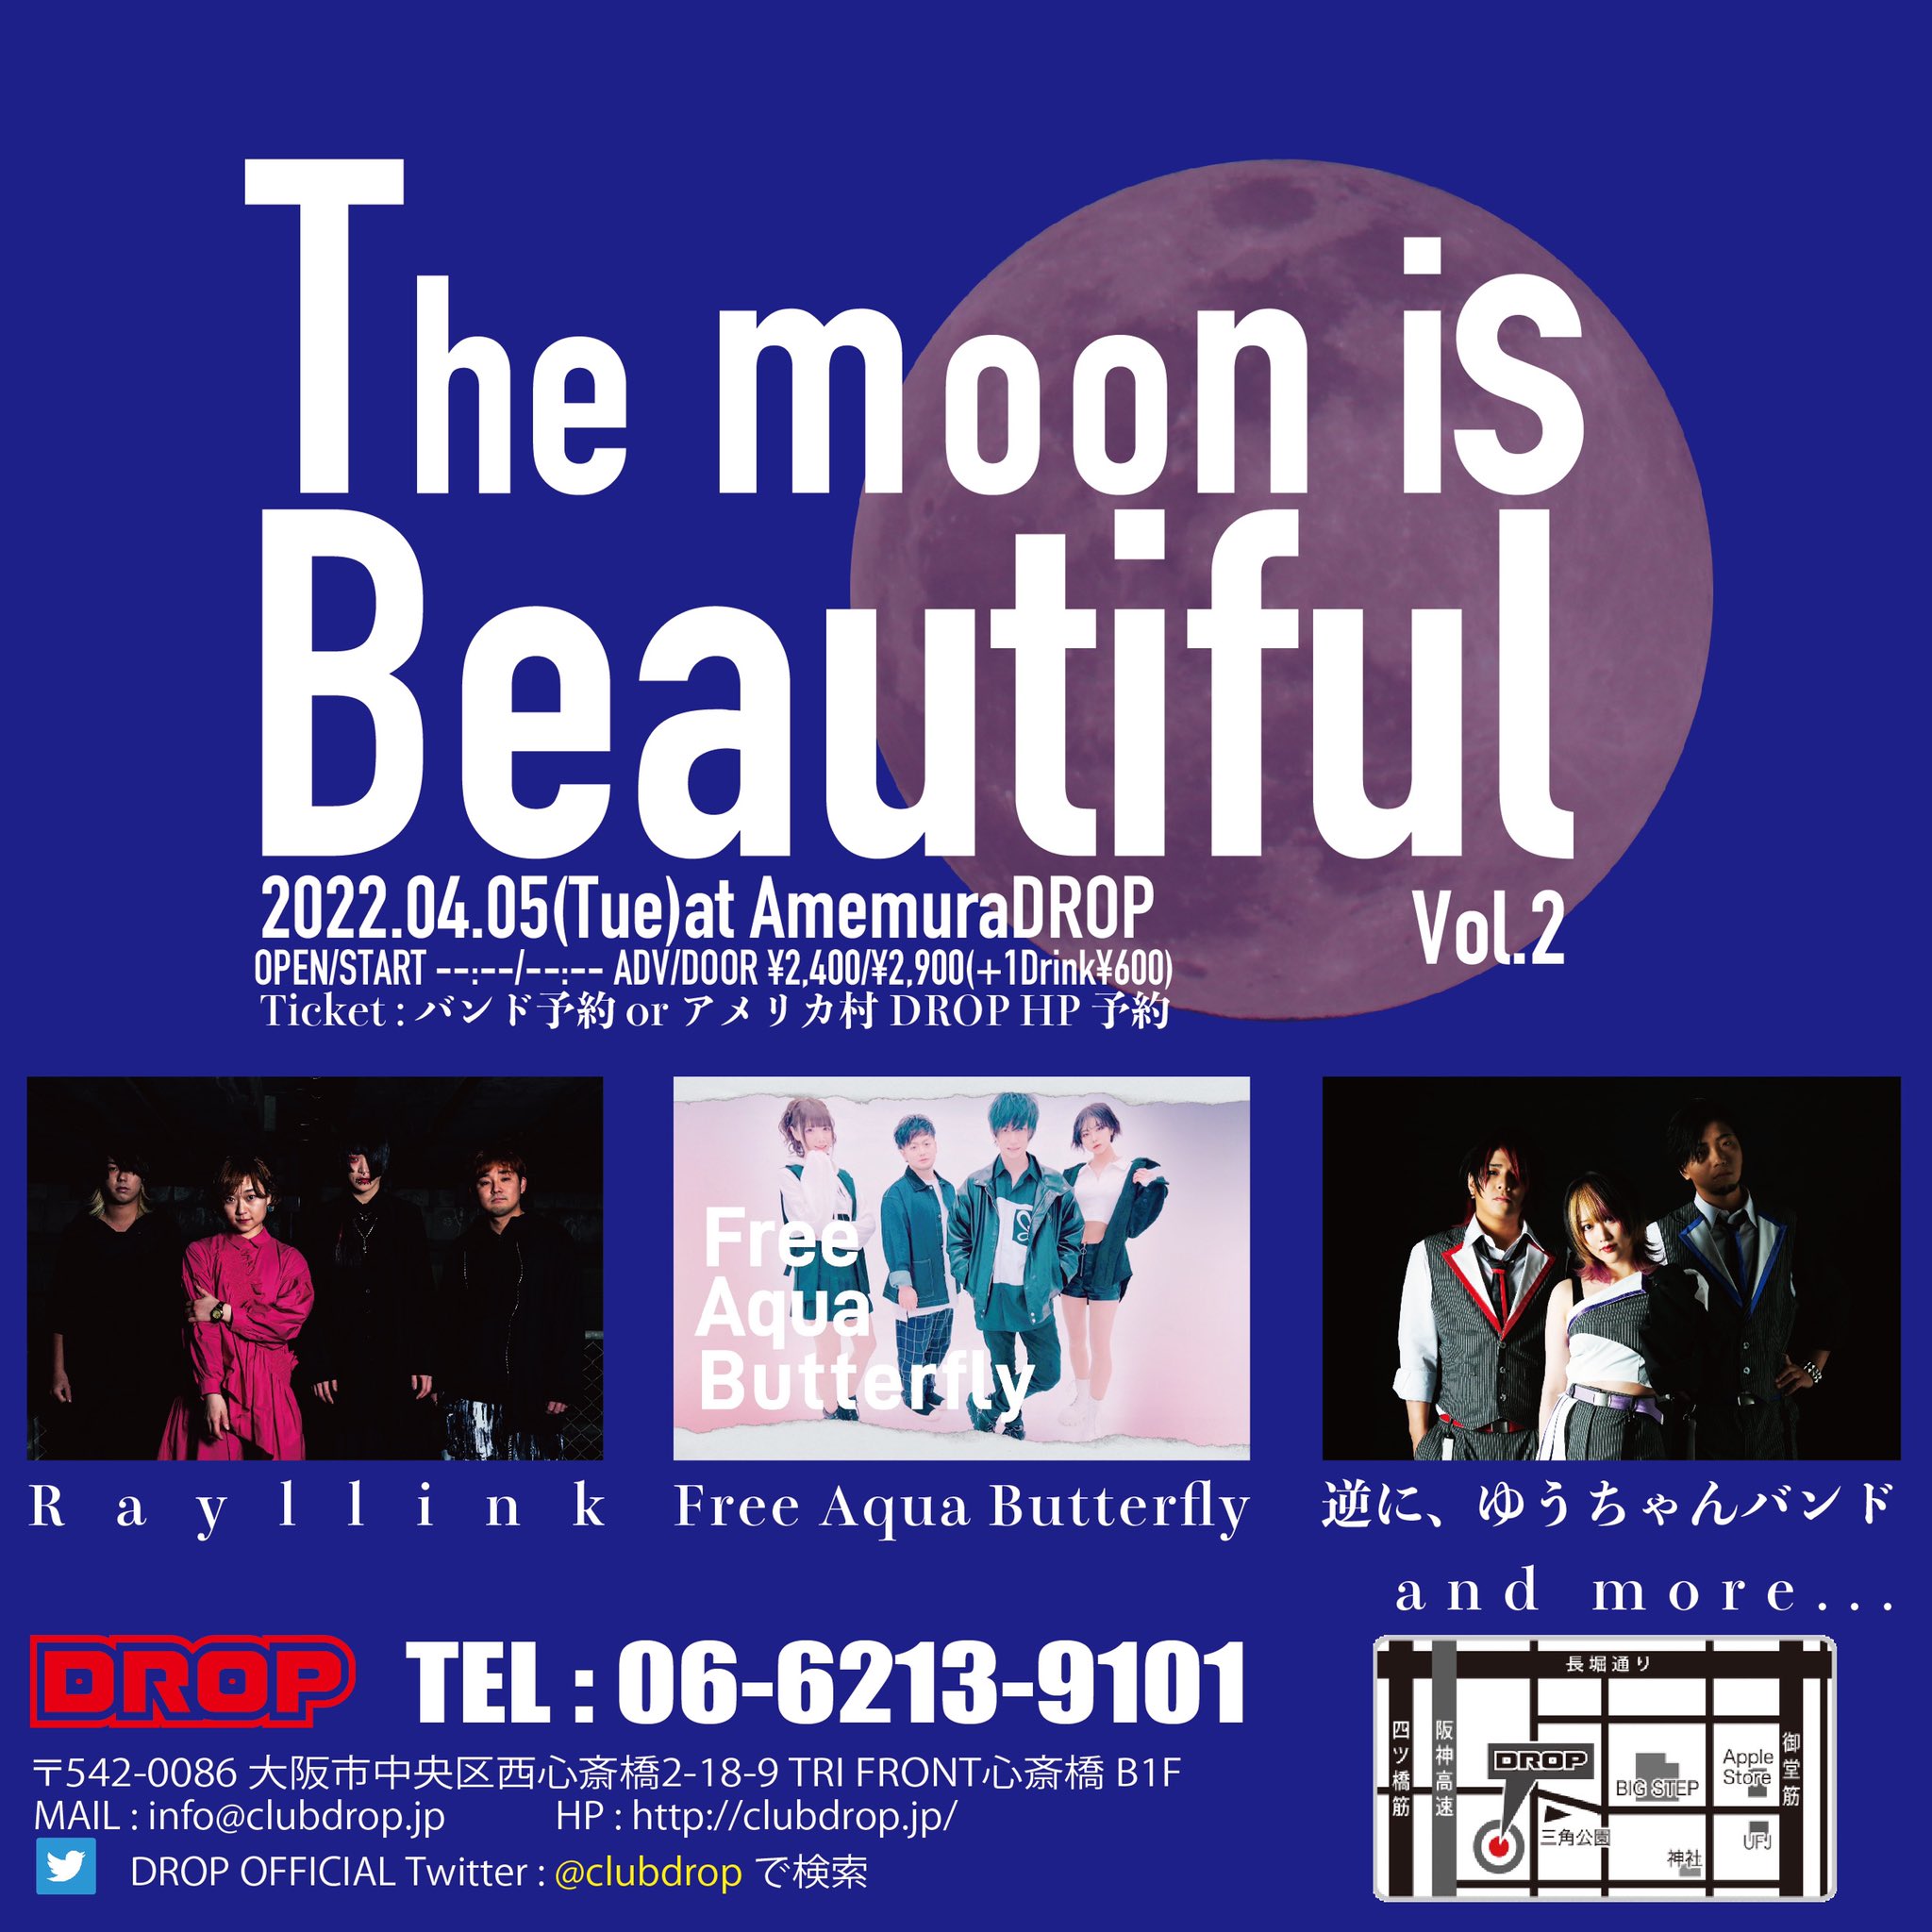 The moon is Beautiful vol.2